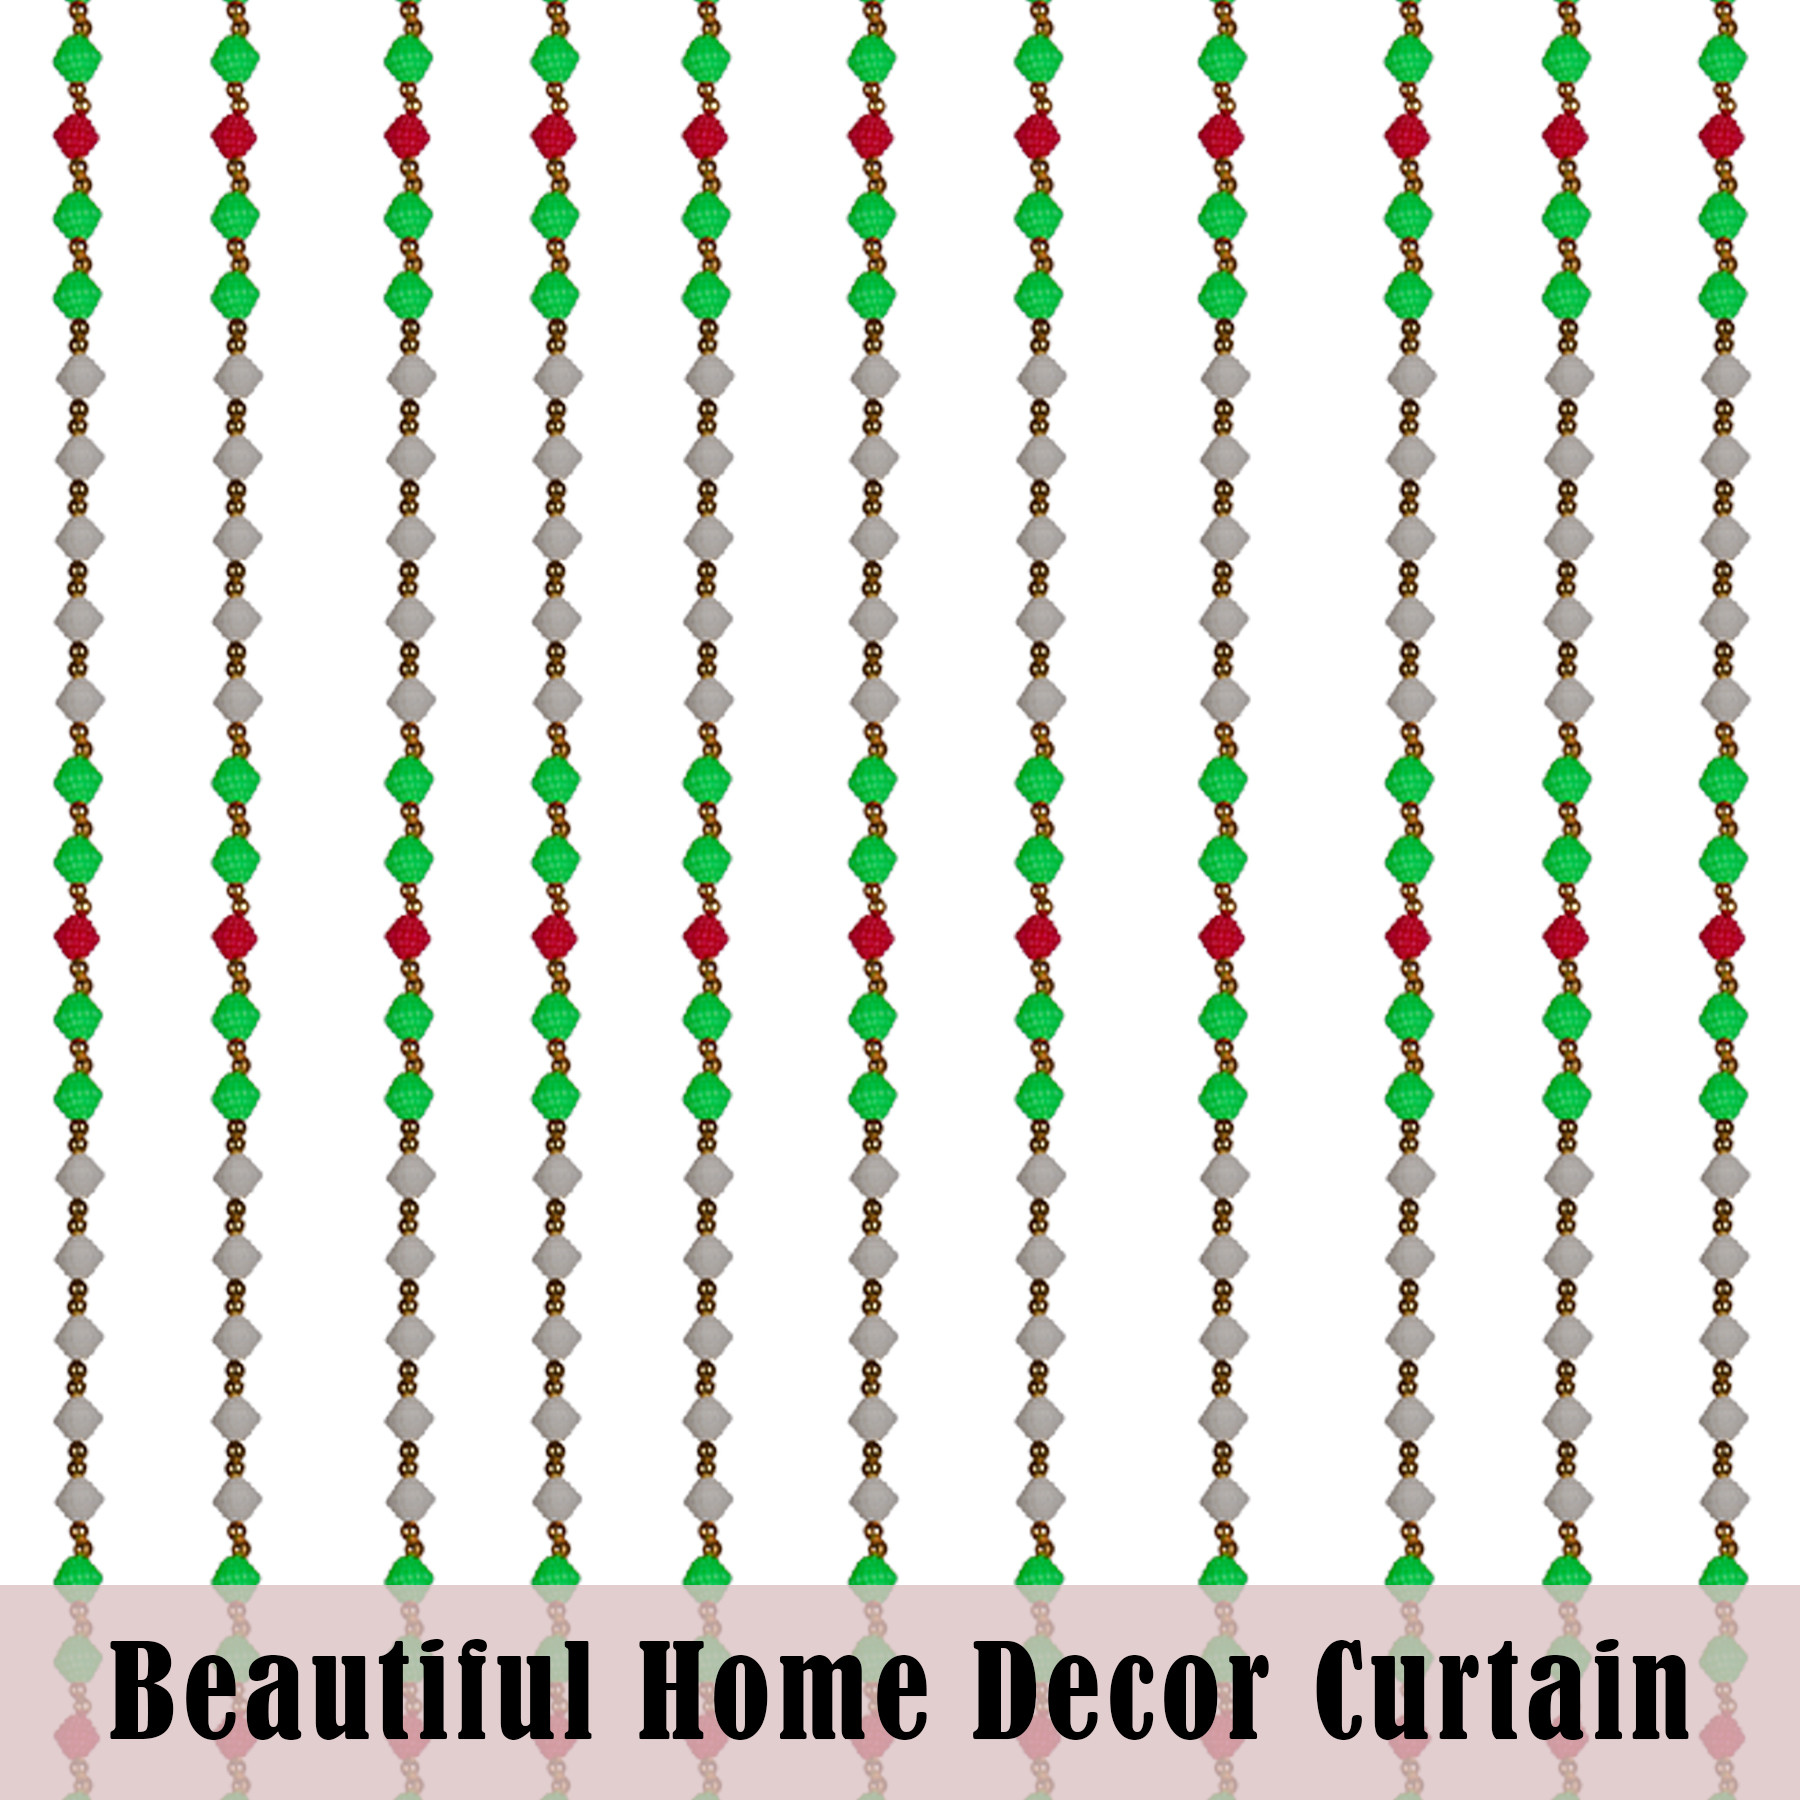 Kuber Industries String Curtain | Fancy Sparkling Door Curtains for Home Décor | Pooja Room String Curtains | String Beads Sheer Curtains | Angura Curtains | 4x7 Feet | Multicolor